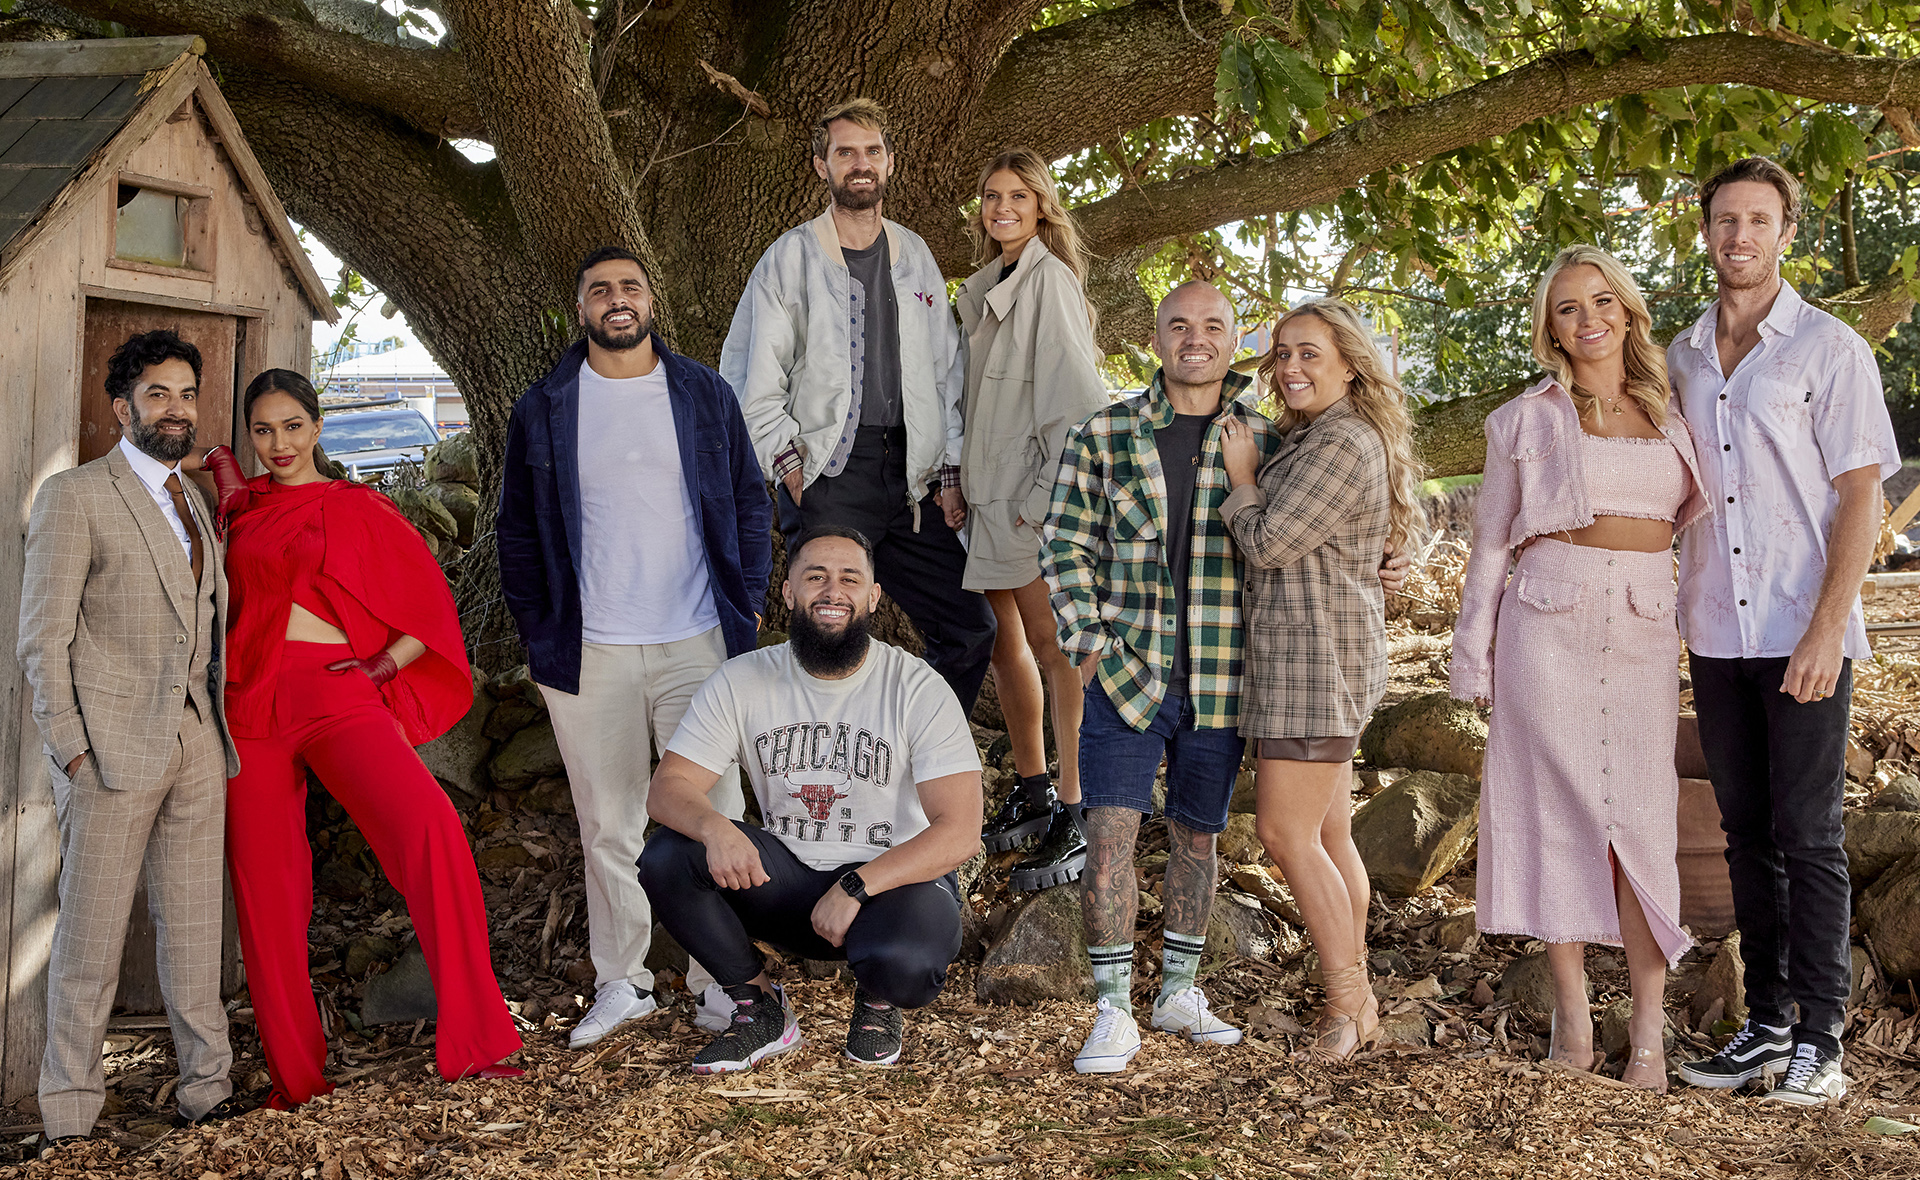 Meet the cast of The Block 2022, including an ex-Neighbours star, model and AFL player